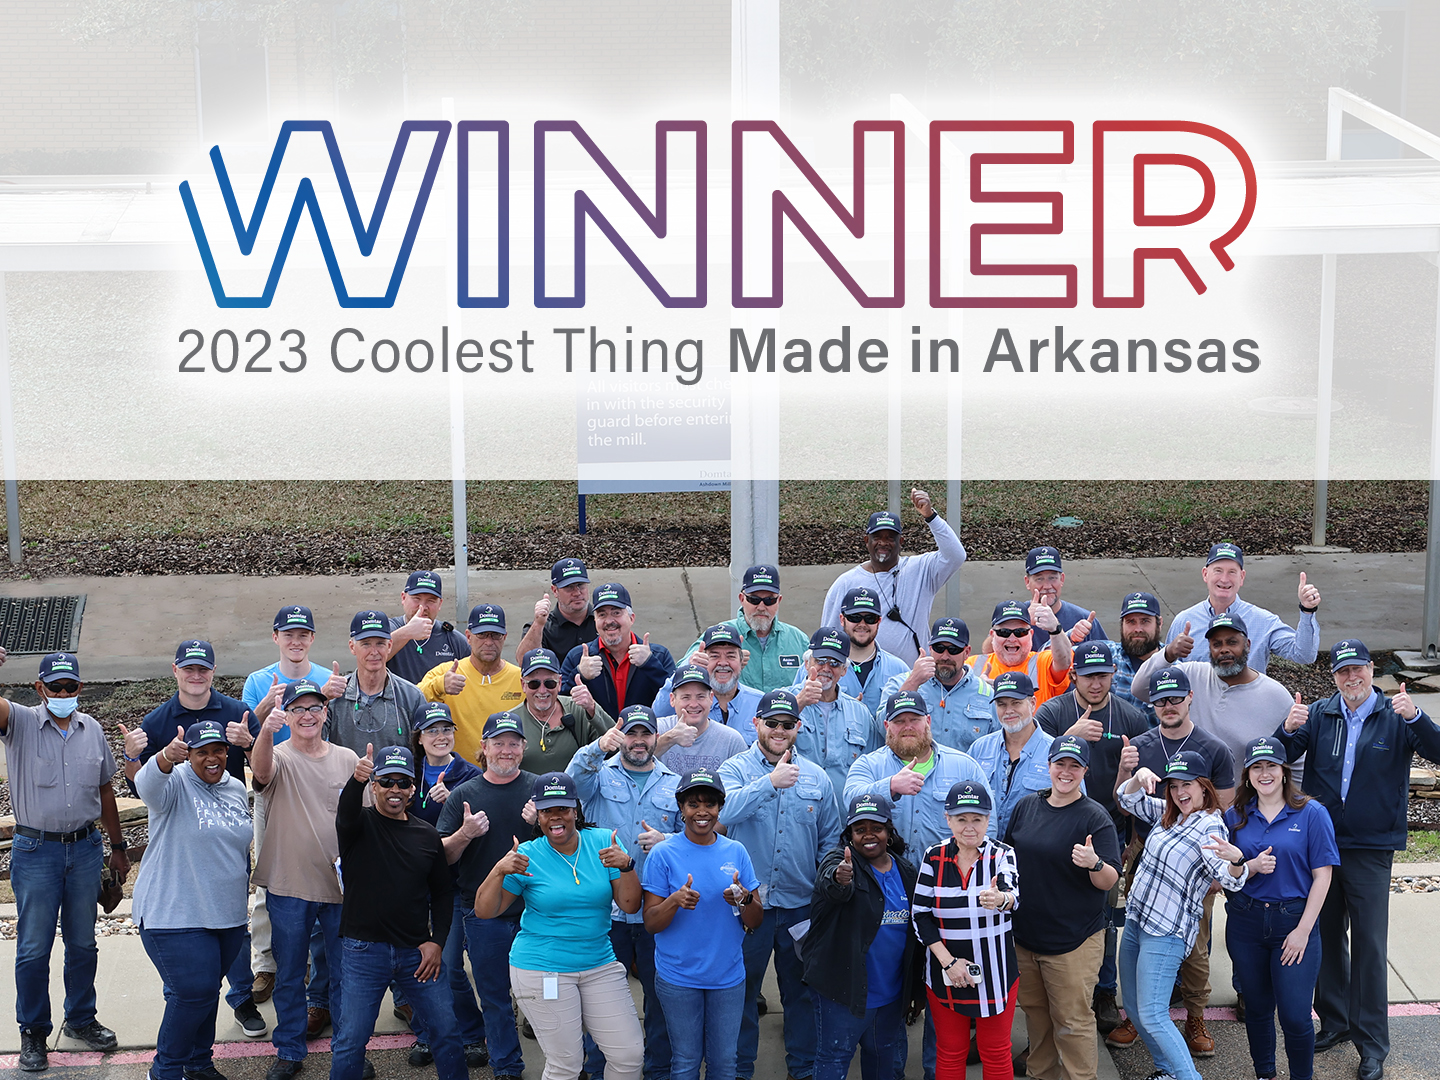 Our fluff pulp was named as the coolest thing made in Arkansas. Image: Group of Ashdown Mill employees below banner that says WINNER 2023 Coolest Thing Made in Arkansas.